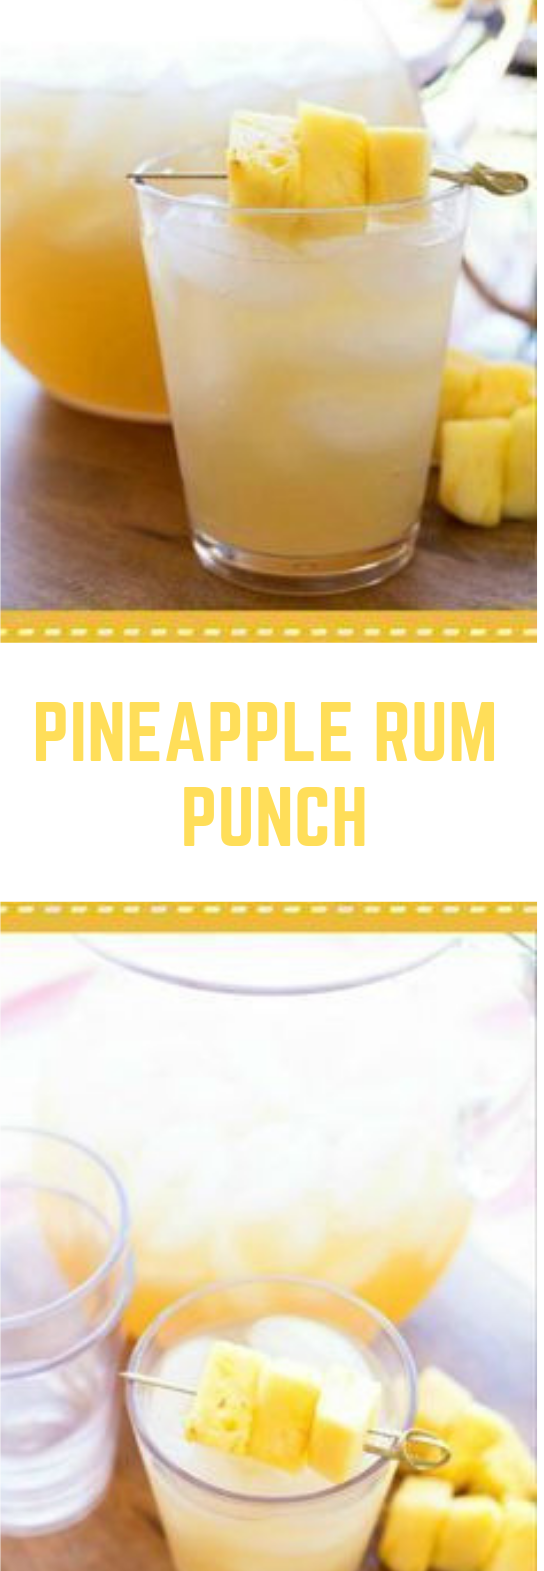 Pineapple Rum Punch #drink #delicious